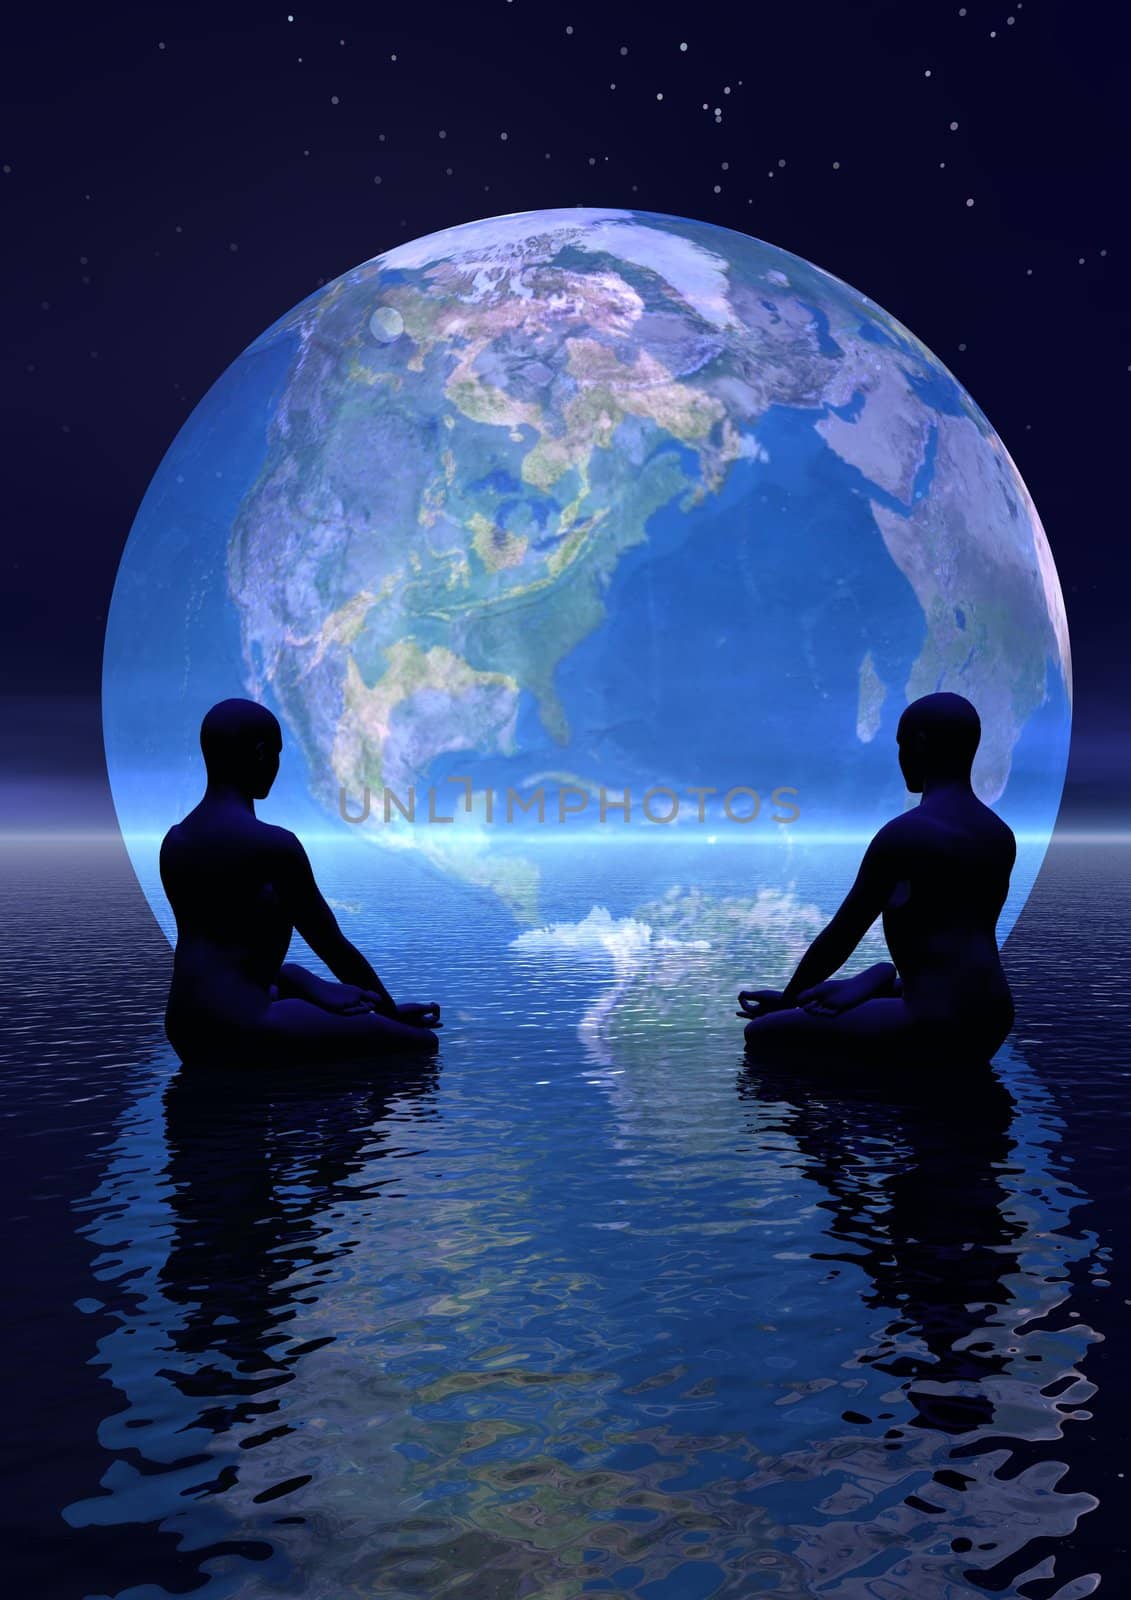 Two human silouhettes meditating in front of the earth by night